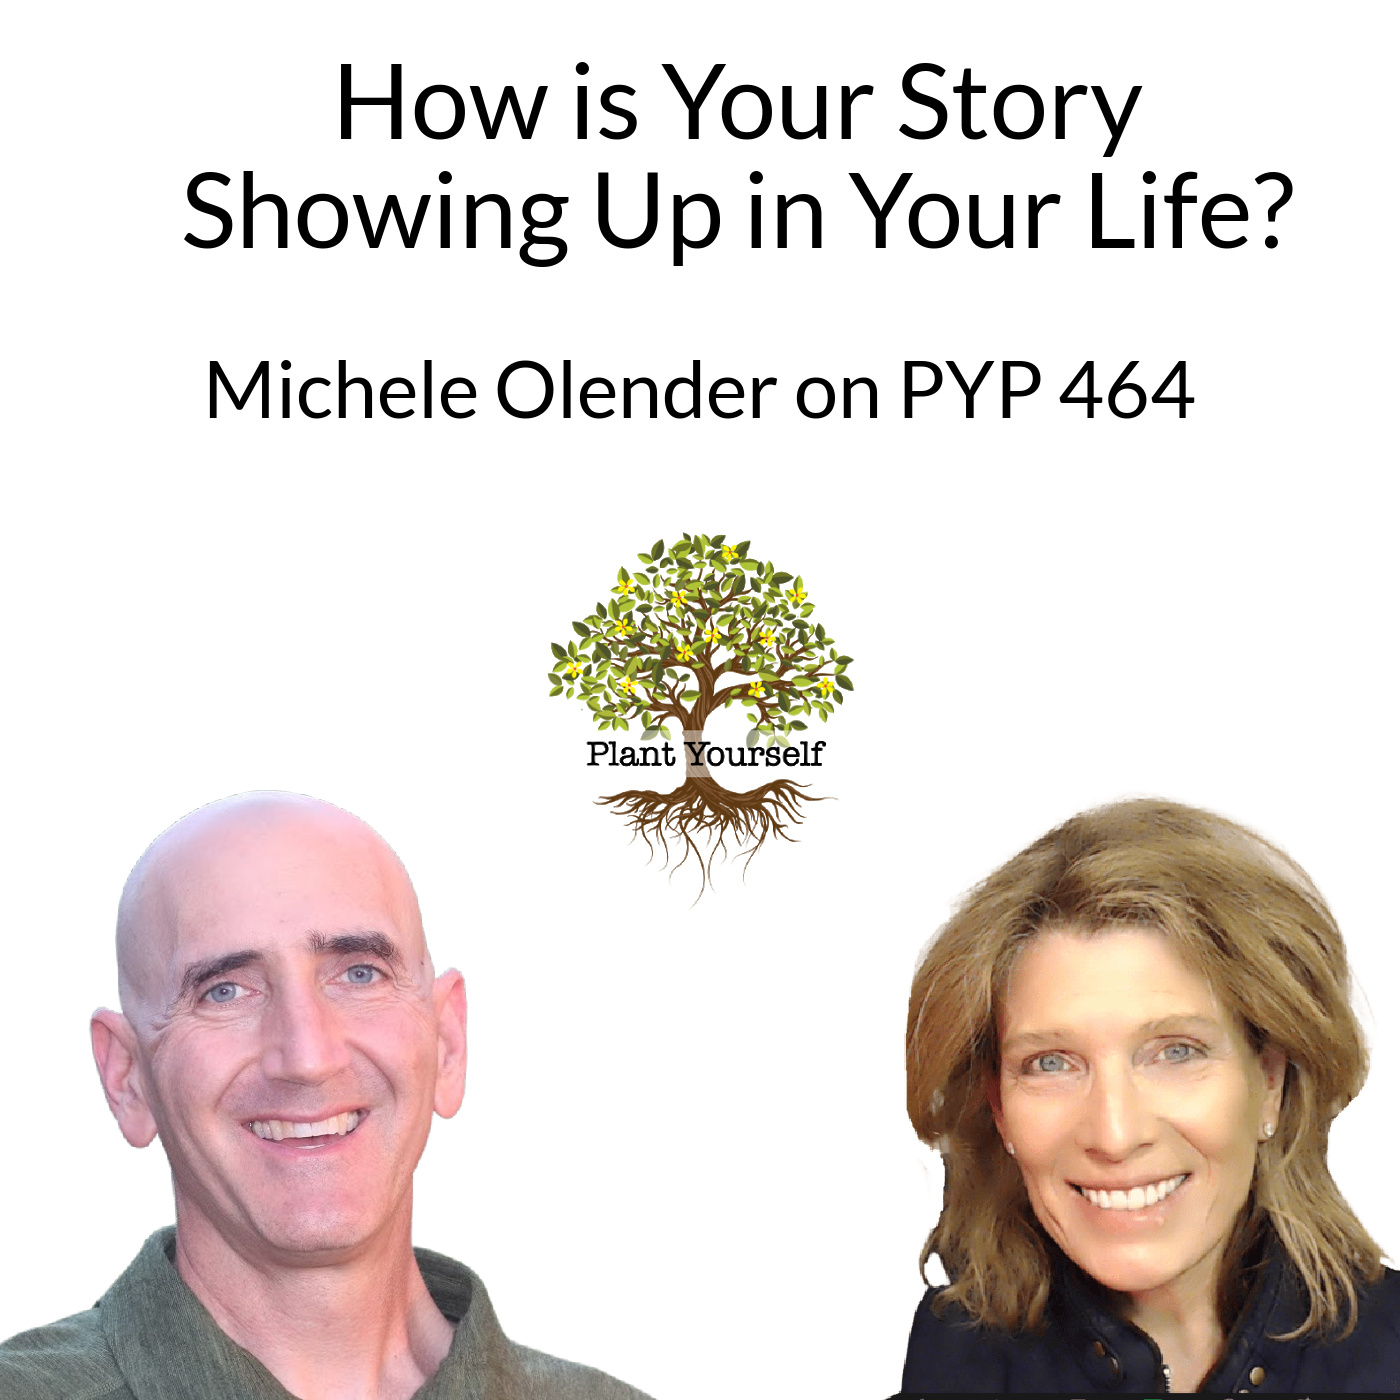 How is Your Story Showing Up in Your Life?: Michele Olender on PYP 464